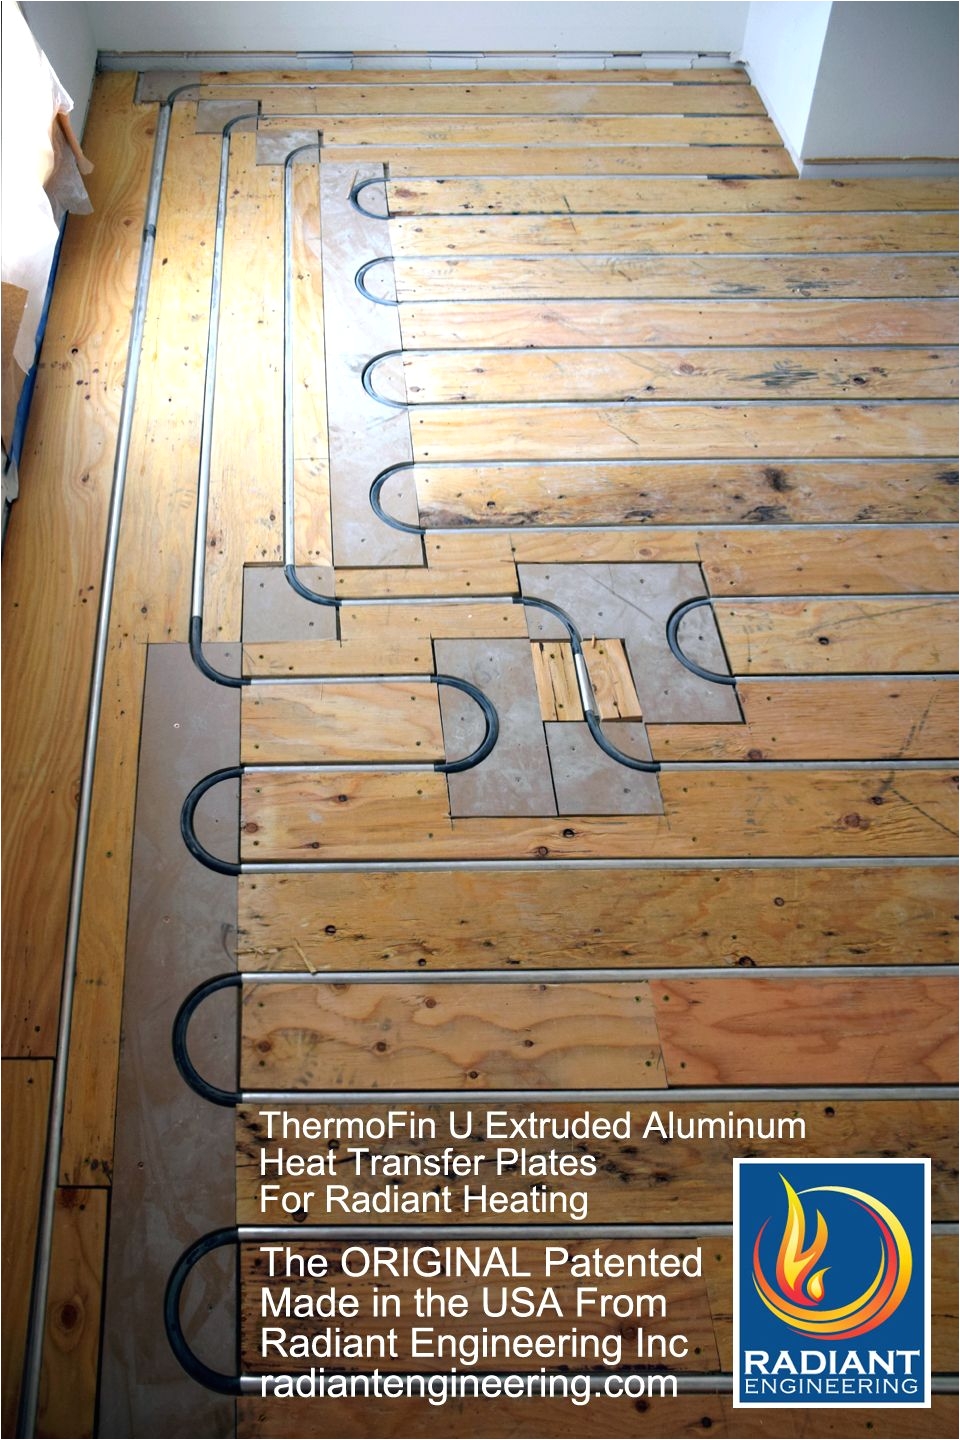 Hydronic Radiant Heated Floors thermofin U Extruded Aluminum Heat Transfer Plates are the original